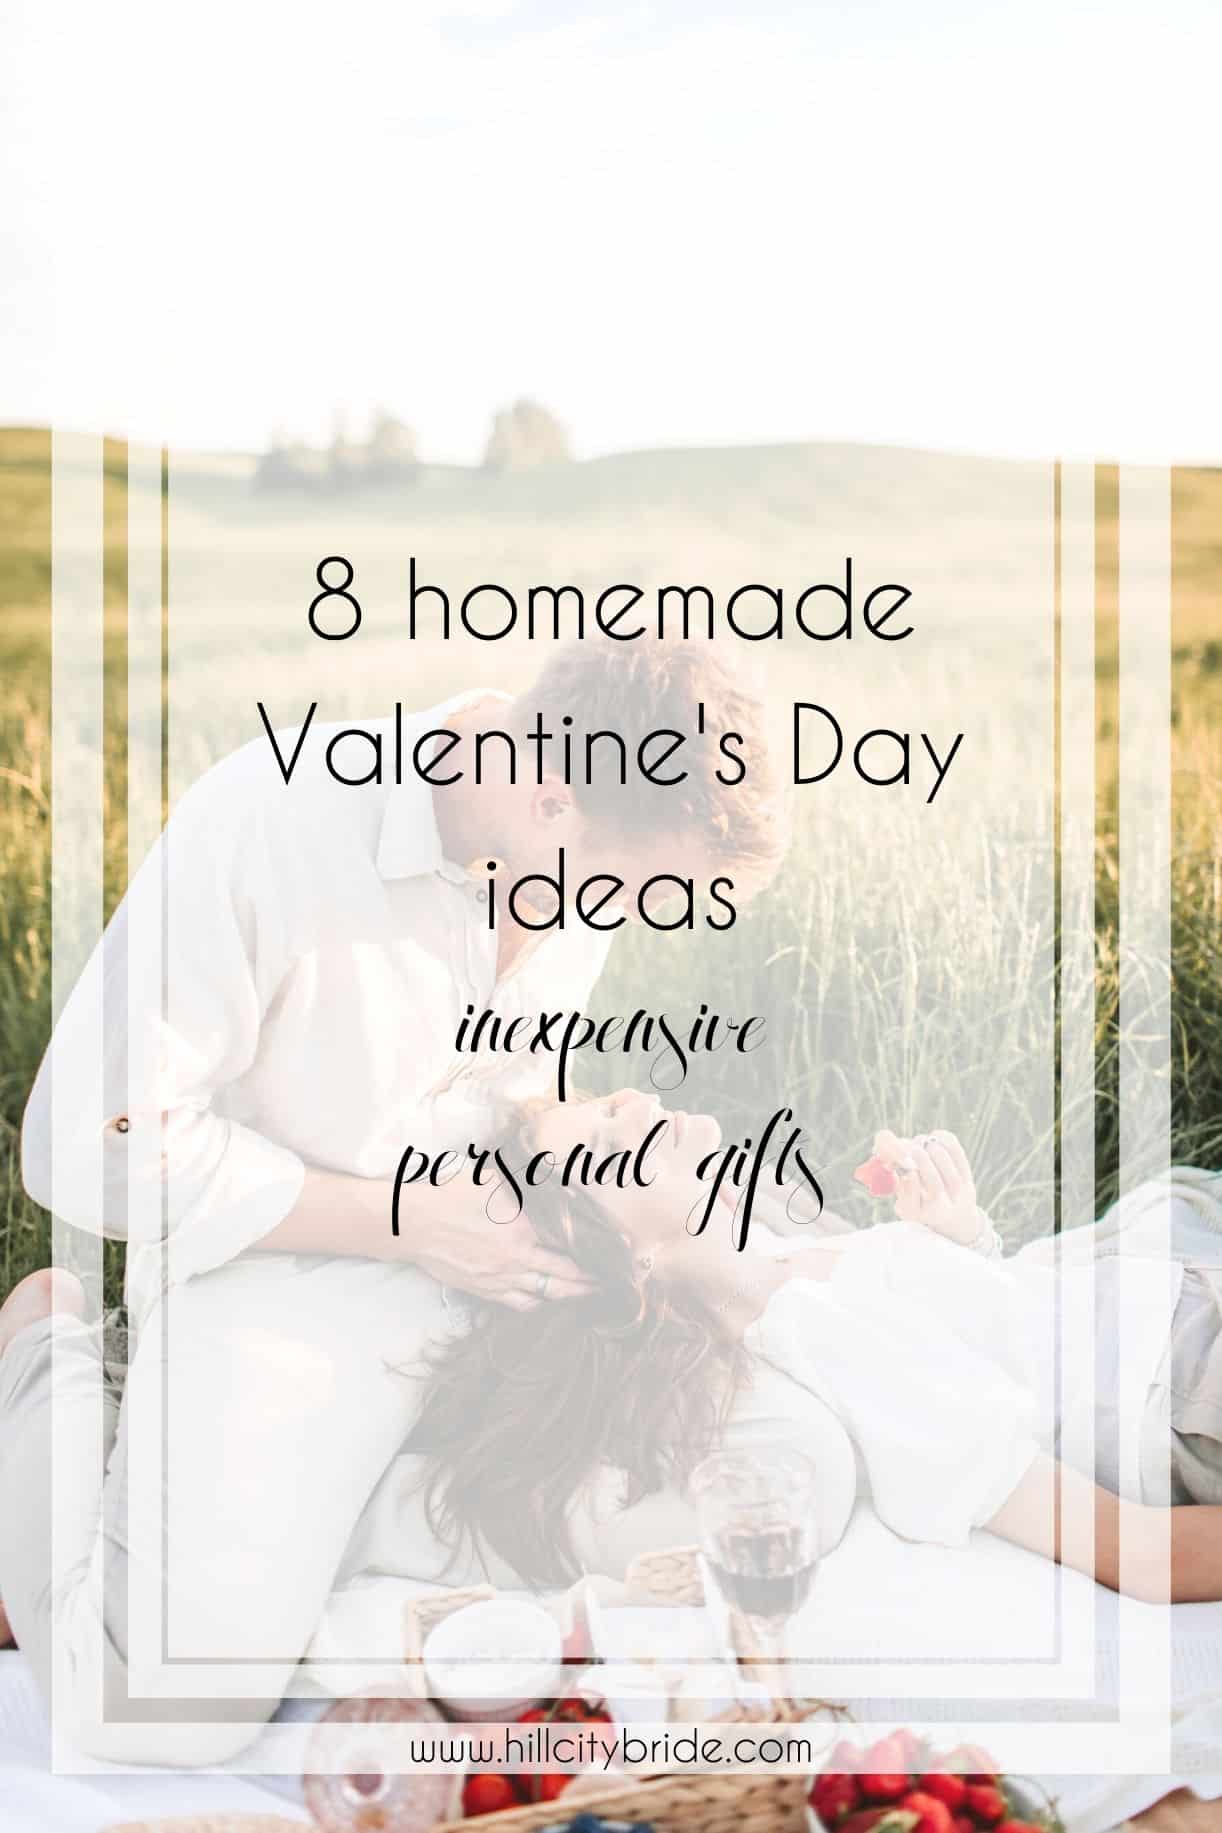 Fabulous Homemade Valentine's Day Ideas to Add a Personal Touch